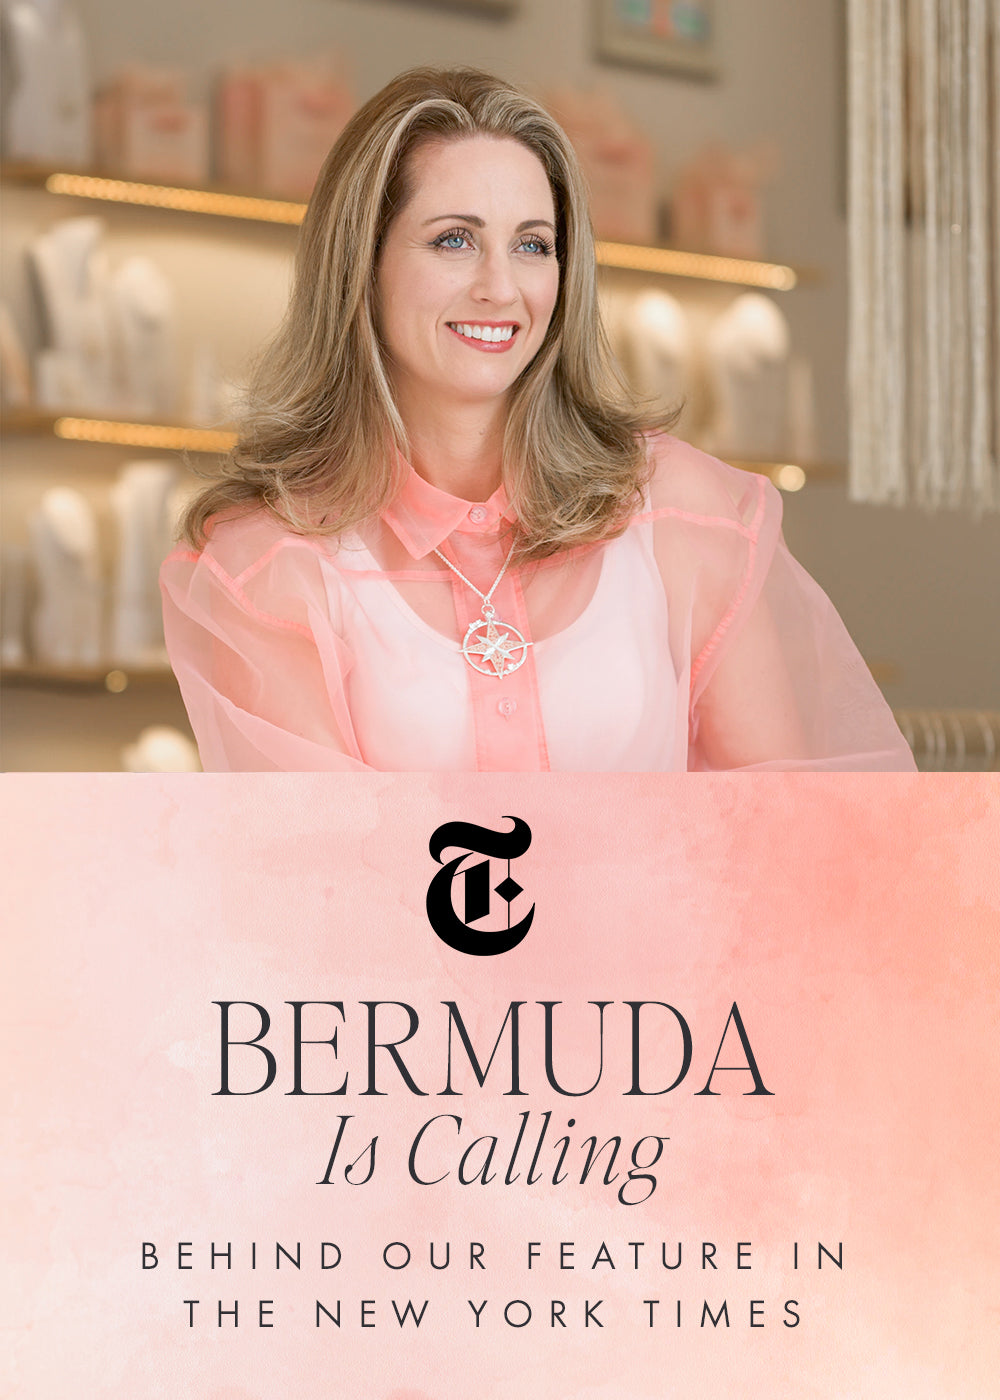 Bermuda is Calling. Behind our Feature in the New York Times